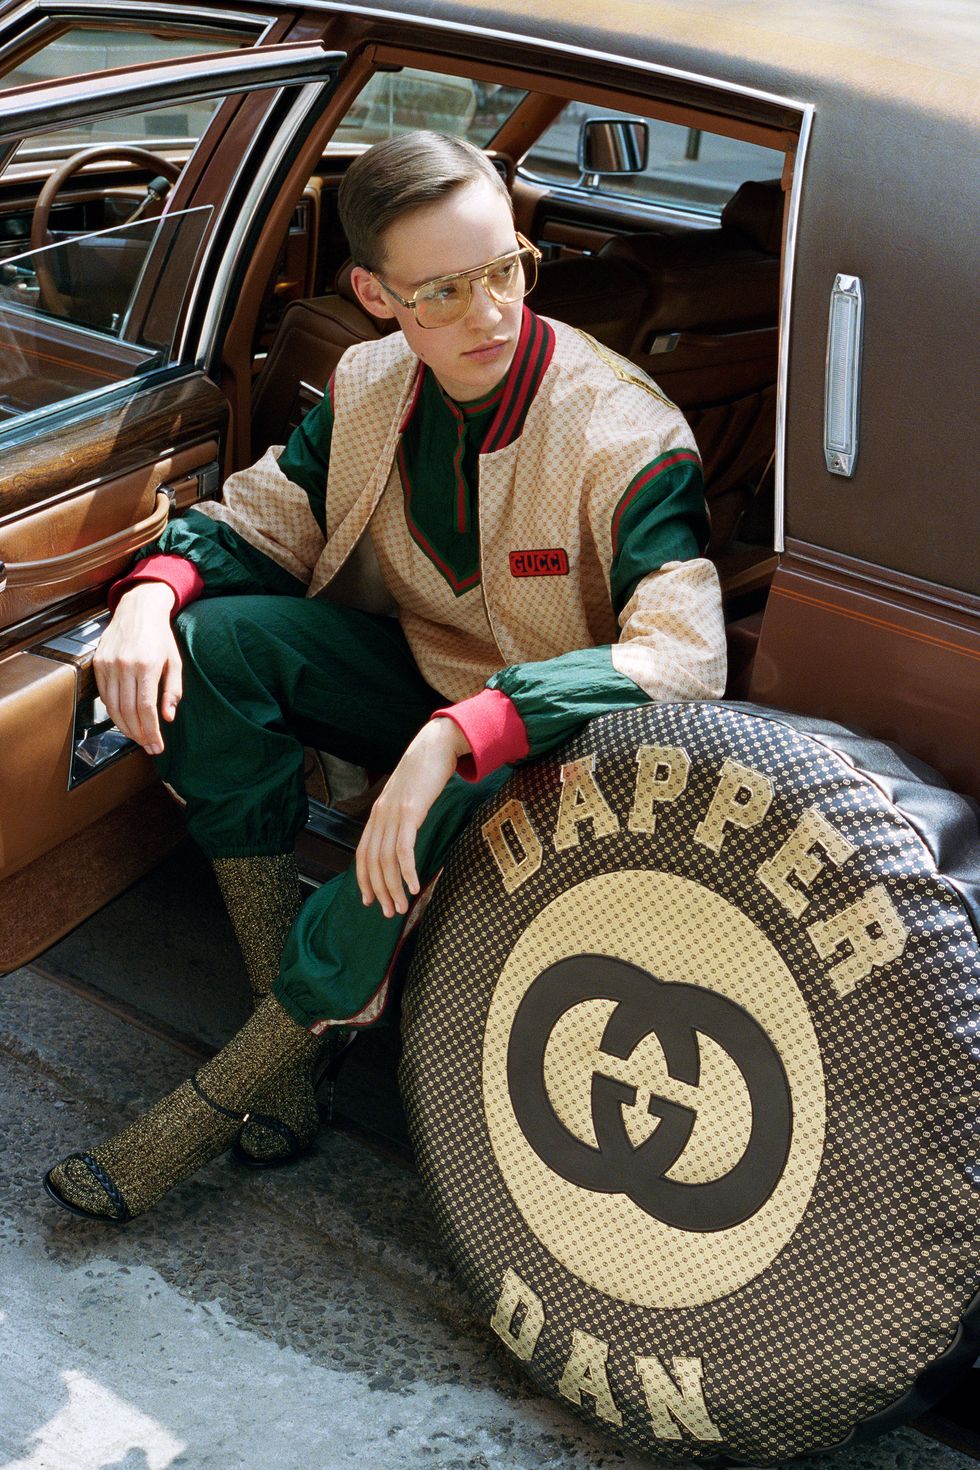 Introducing the Gucci-Dapper Dan collection for Fall Winter 2018. Dapper Dan,  a well-known Harlem designer, invented his own s…